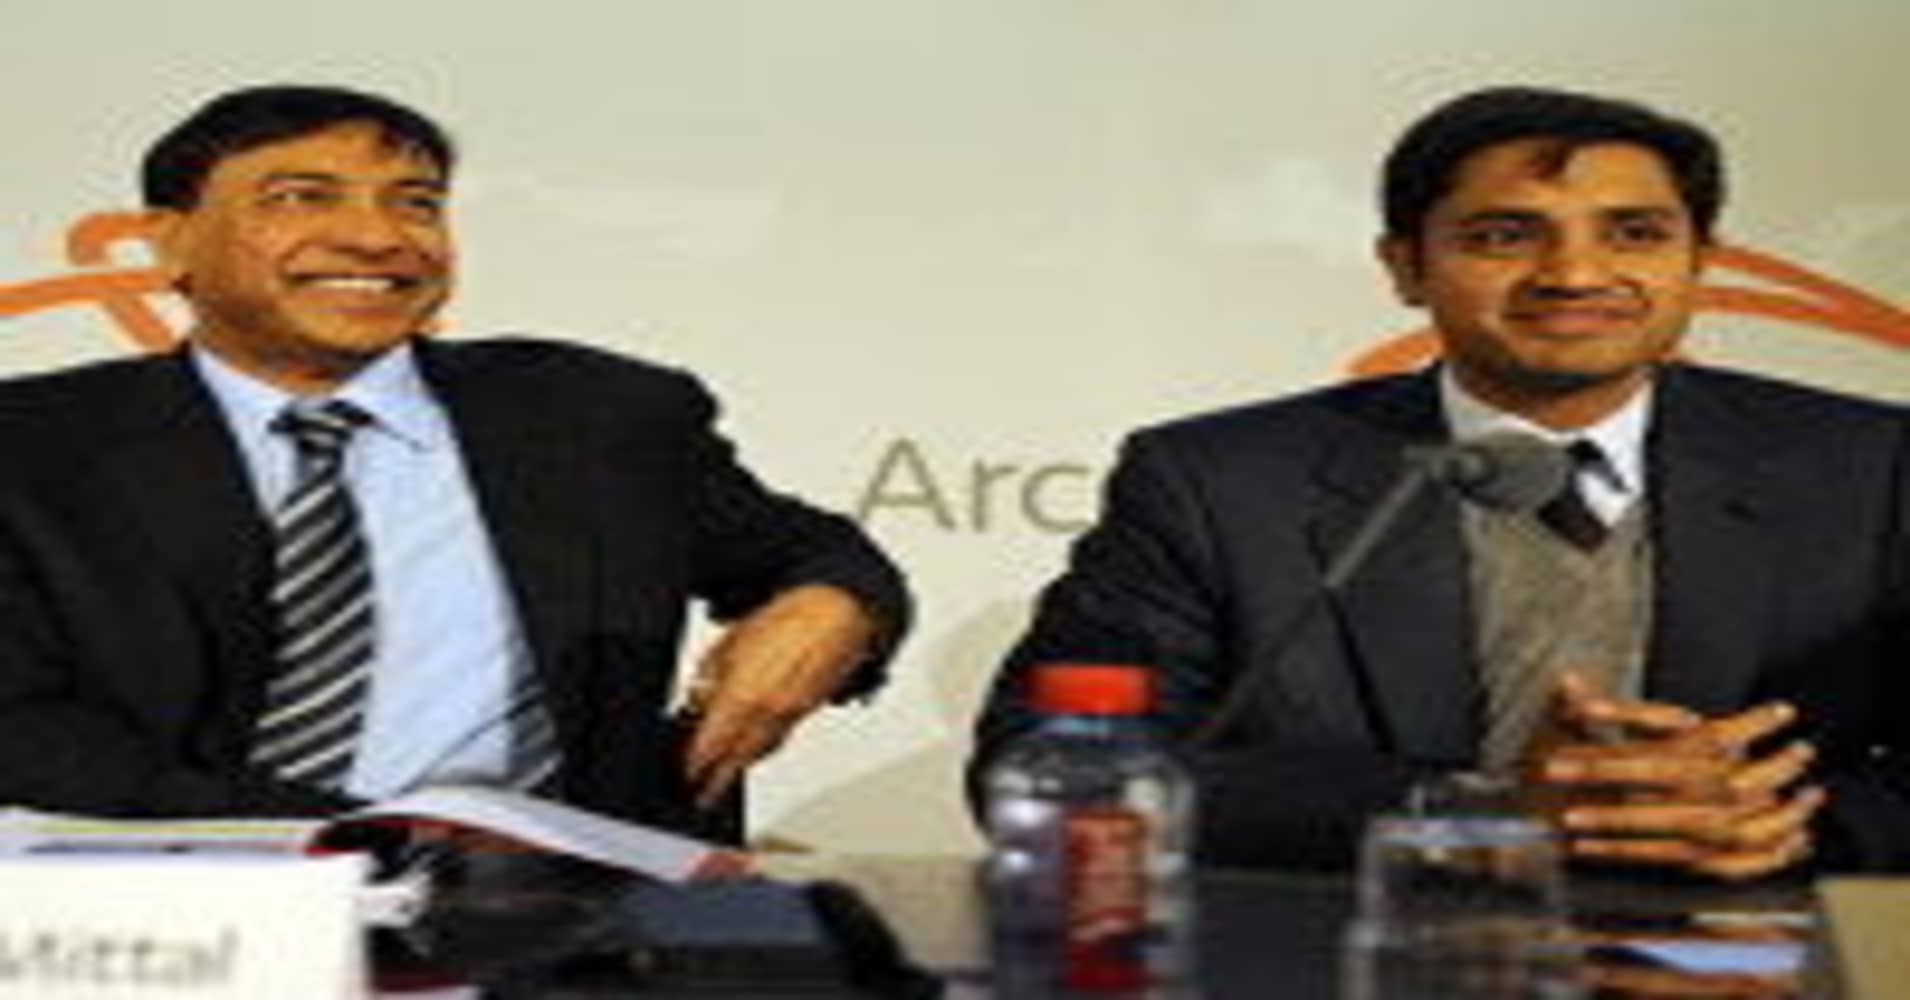 Aditya Mittal To Take Over From His Father As CEO Of ArcelorMittal